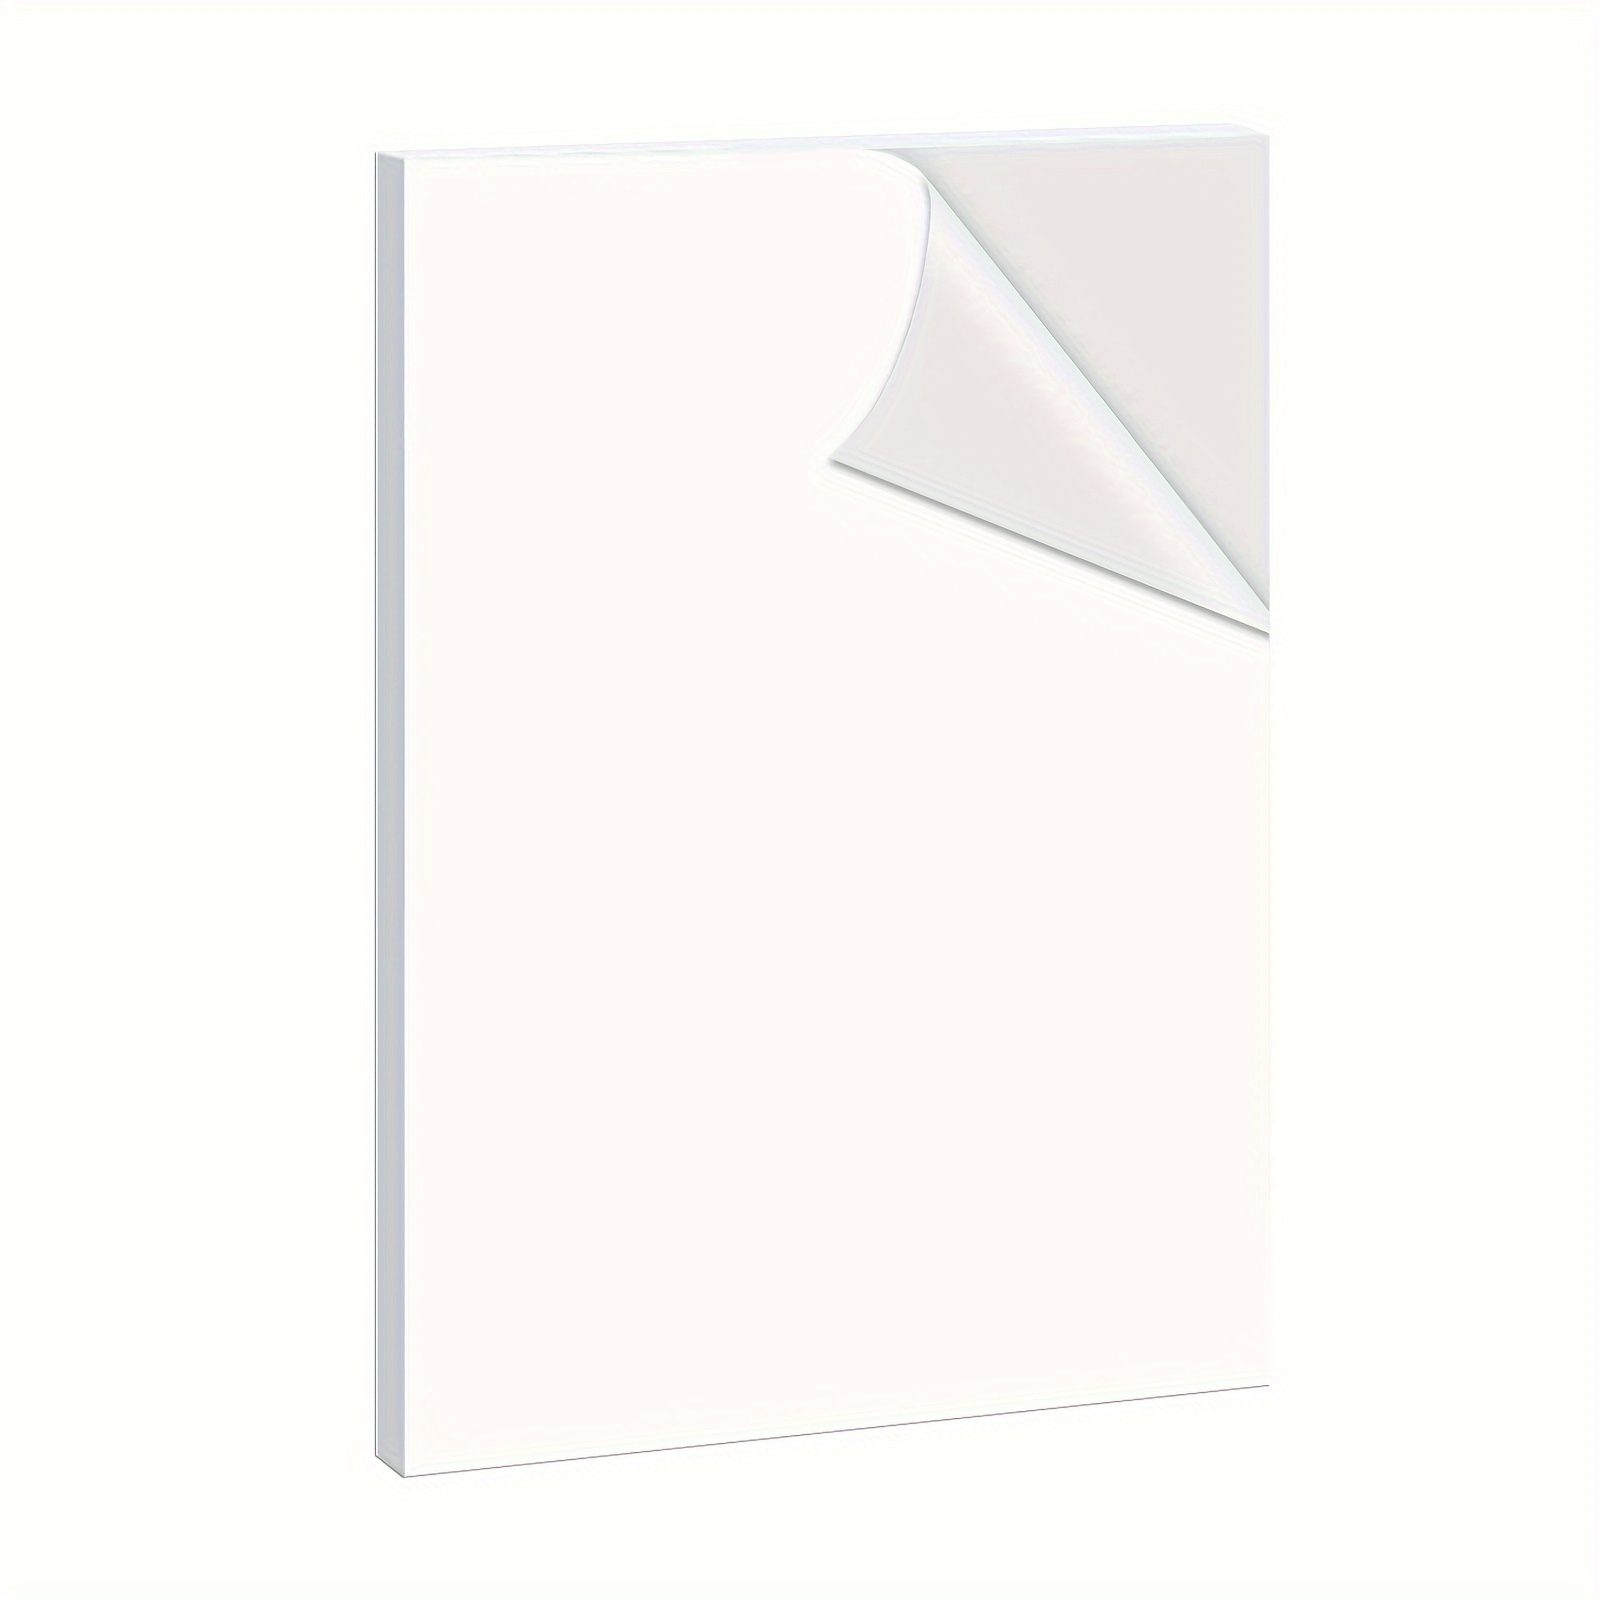 White A4 High Glossy Sticker Paper Self Adhesive 180 GSM for